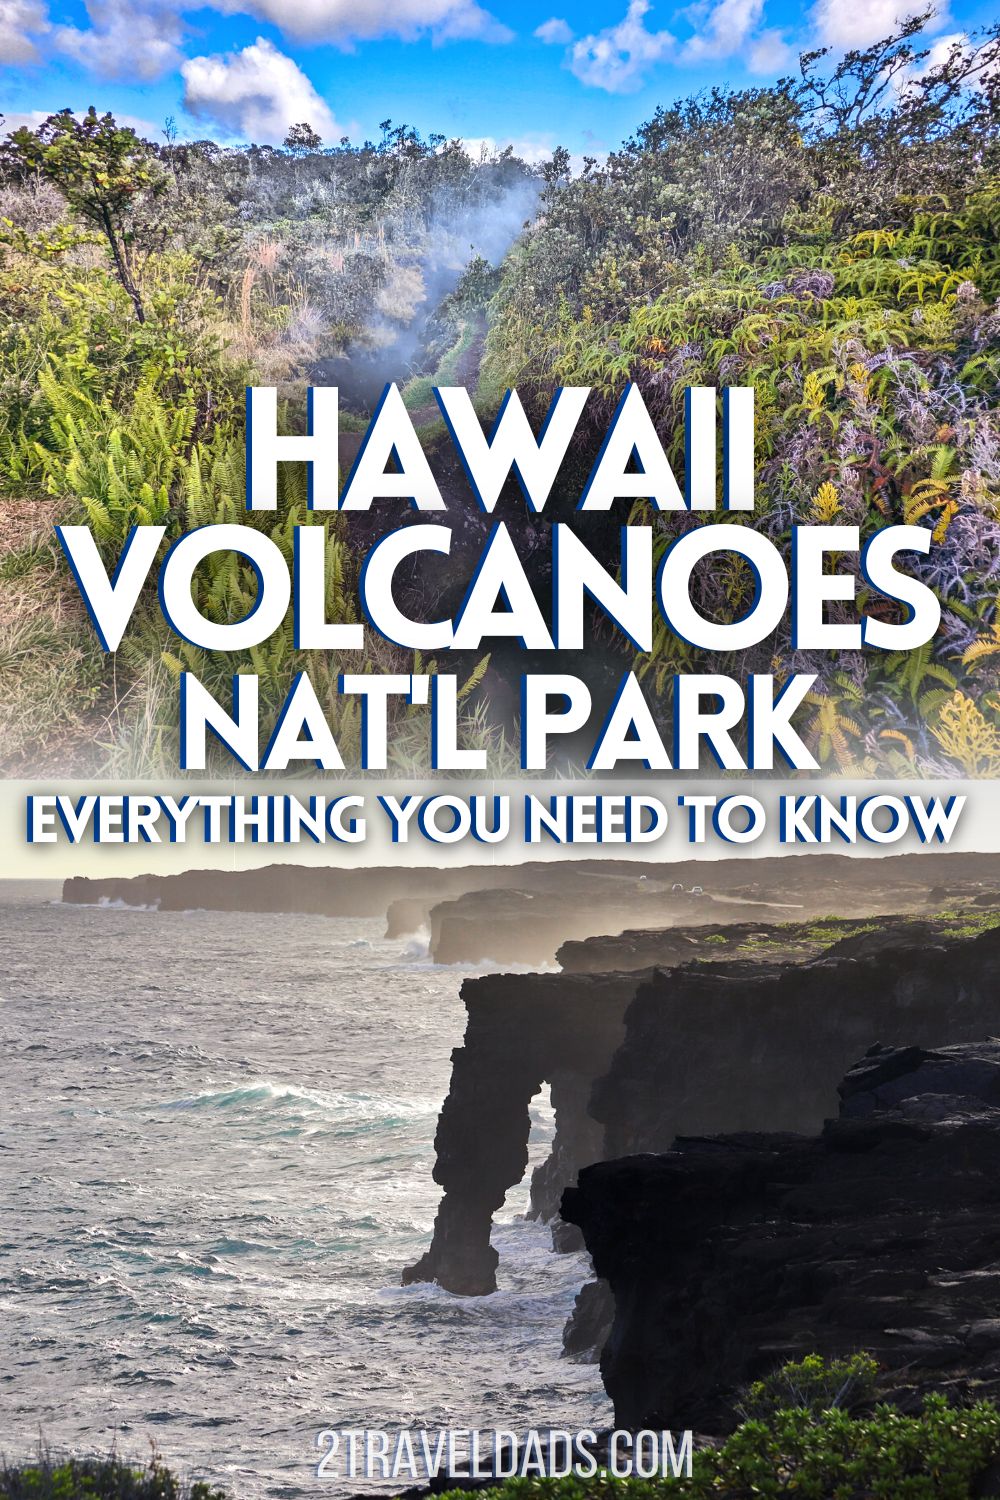 Hawaii Volcanoes National Park is a very unique place to visit with many things to do. From hiking in lava tubes to watching the glowing, hot lava flowing through the dark, these are our top tips for visiting Hawaii Volcanoes NPS and having an unforgettable time on the Big Island.